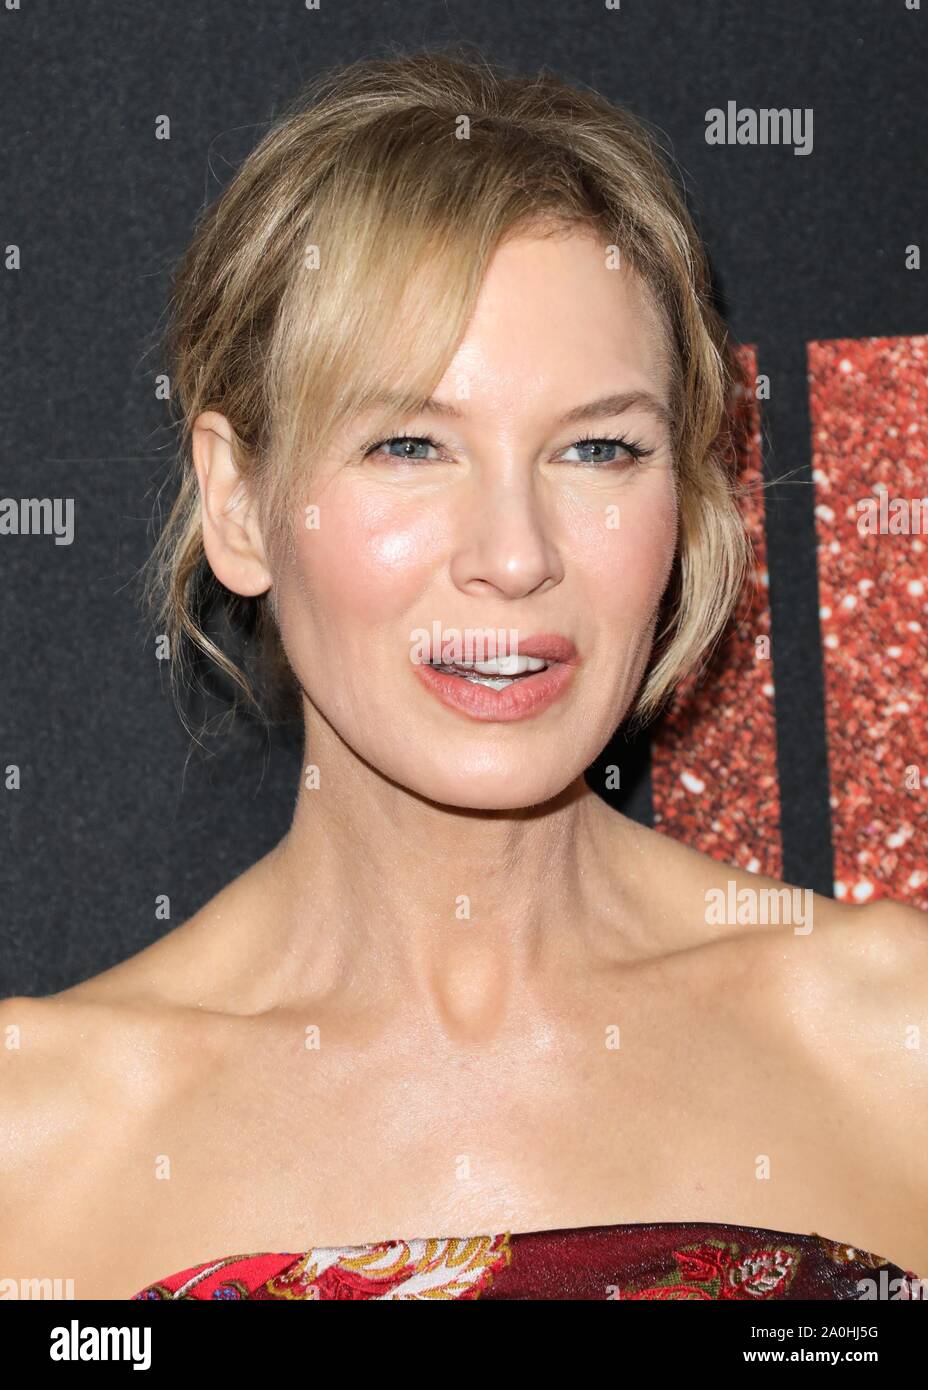 Beverly Hills, United States. 19th Sep, 2019. BEVERLY HILLS, LOS ANGELES, CALIFORNIA, USA - SEPTEMBER 19: Actress Renee Zellweger wearing Oscar de la Renta arrives at the Premiere Of Roadside Attraction's 'Judy' held at the Samuel Goldwyn Theater at the Academy of Motion Picture Arts and Sciences on September 19, 2019 in Beverly Hills, Los Angeles, California, United States. (Photo by David Acosta/Image Press Agency) Credit: Image Press Agency/Alamy Live News Stock Photo